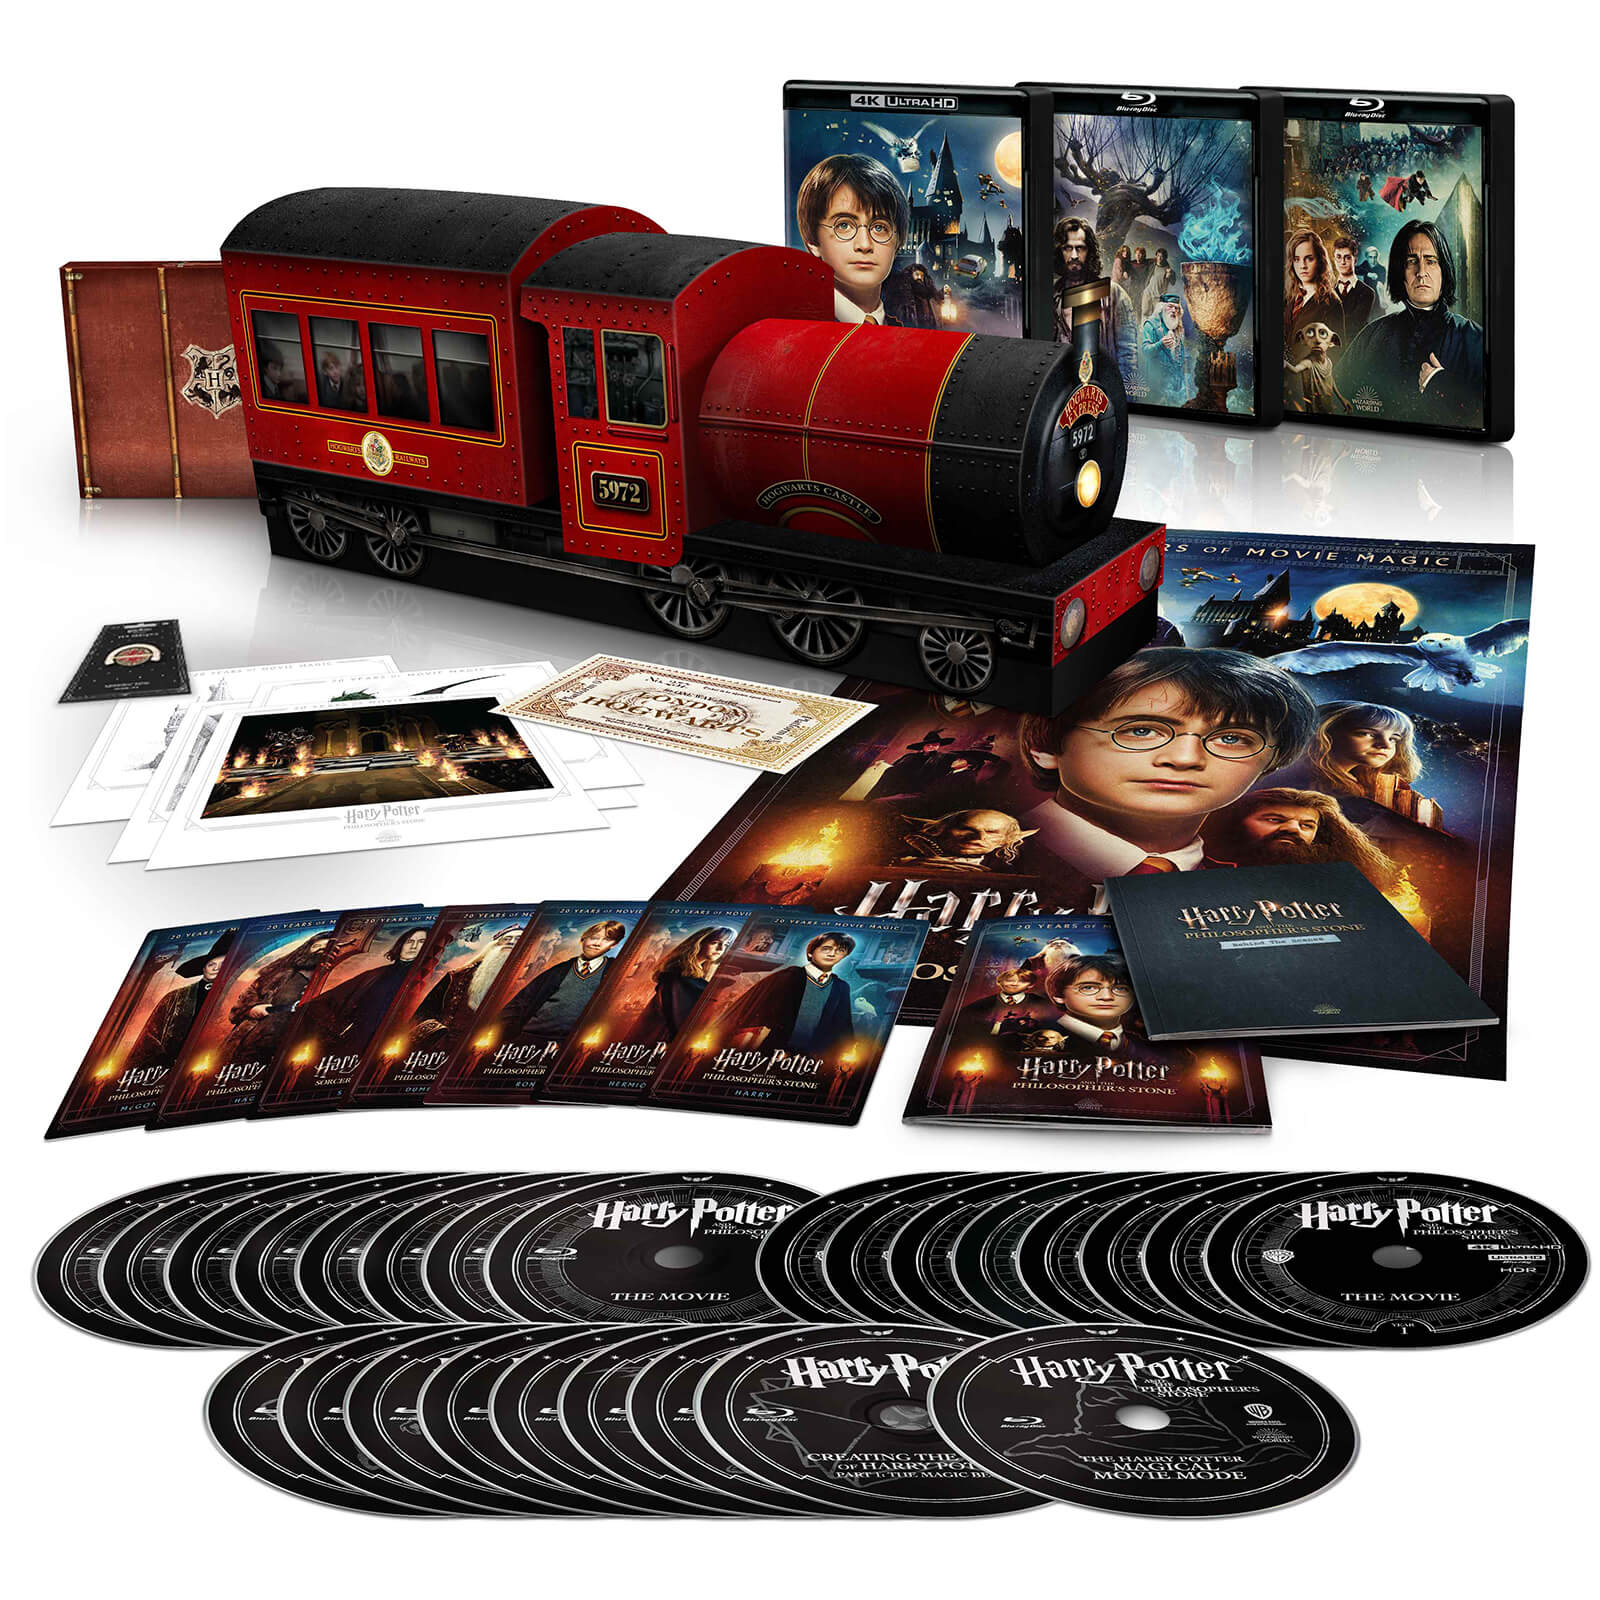 Harry Potter The Complete Collection: 4K Ultra HD 20th Anniversary Collector's Hogwarts Express Edition (Includes Blu-ra